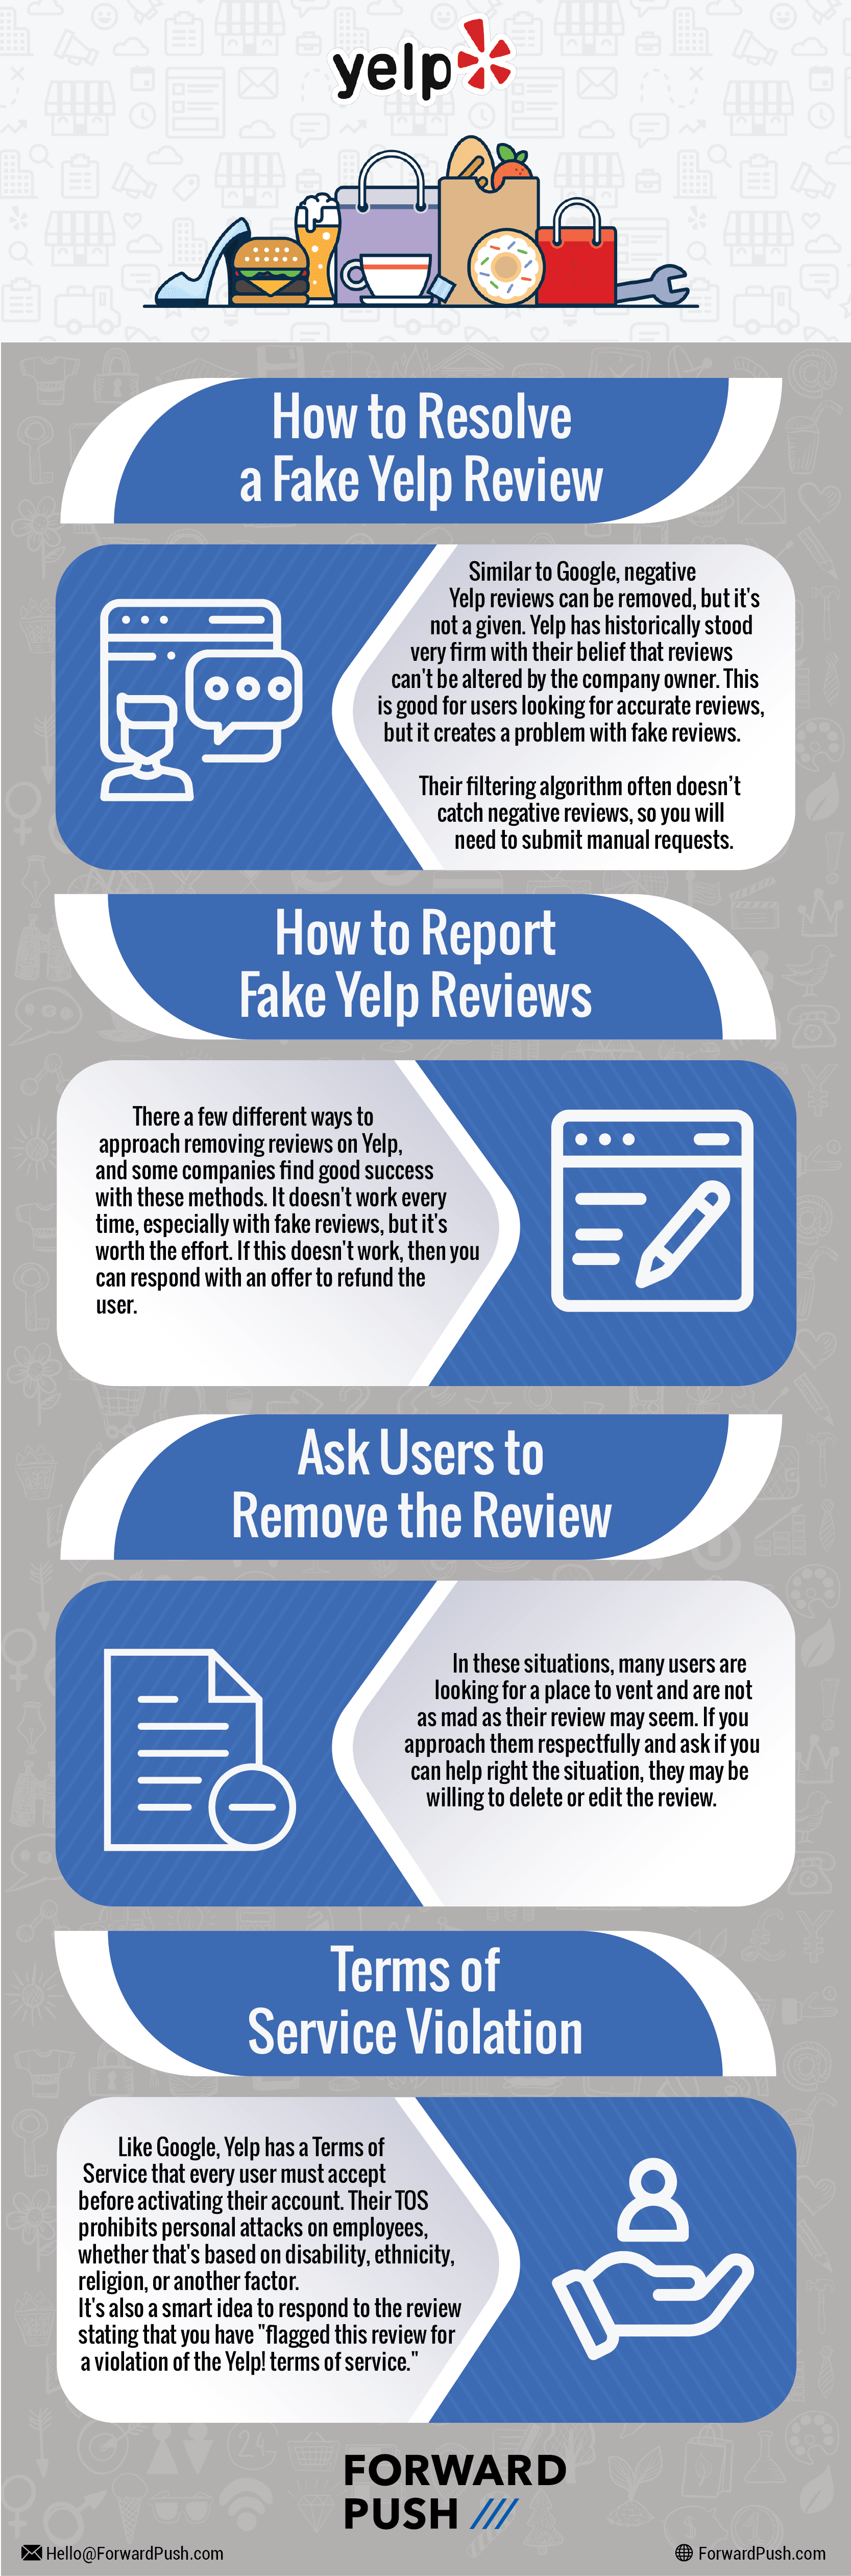 infographic-how-to-resolve-fake-yelp-review